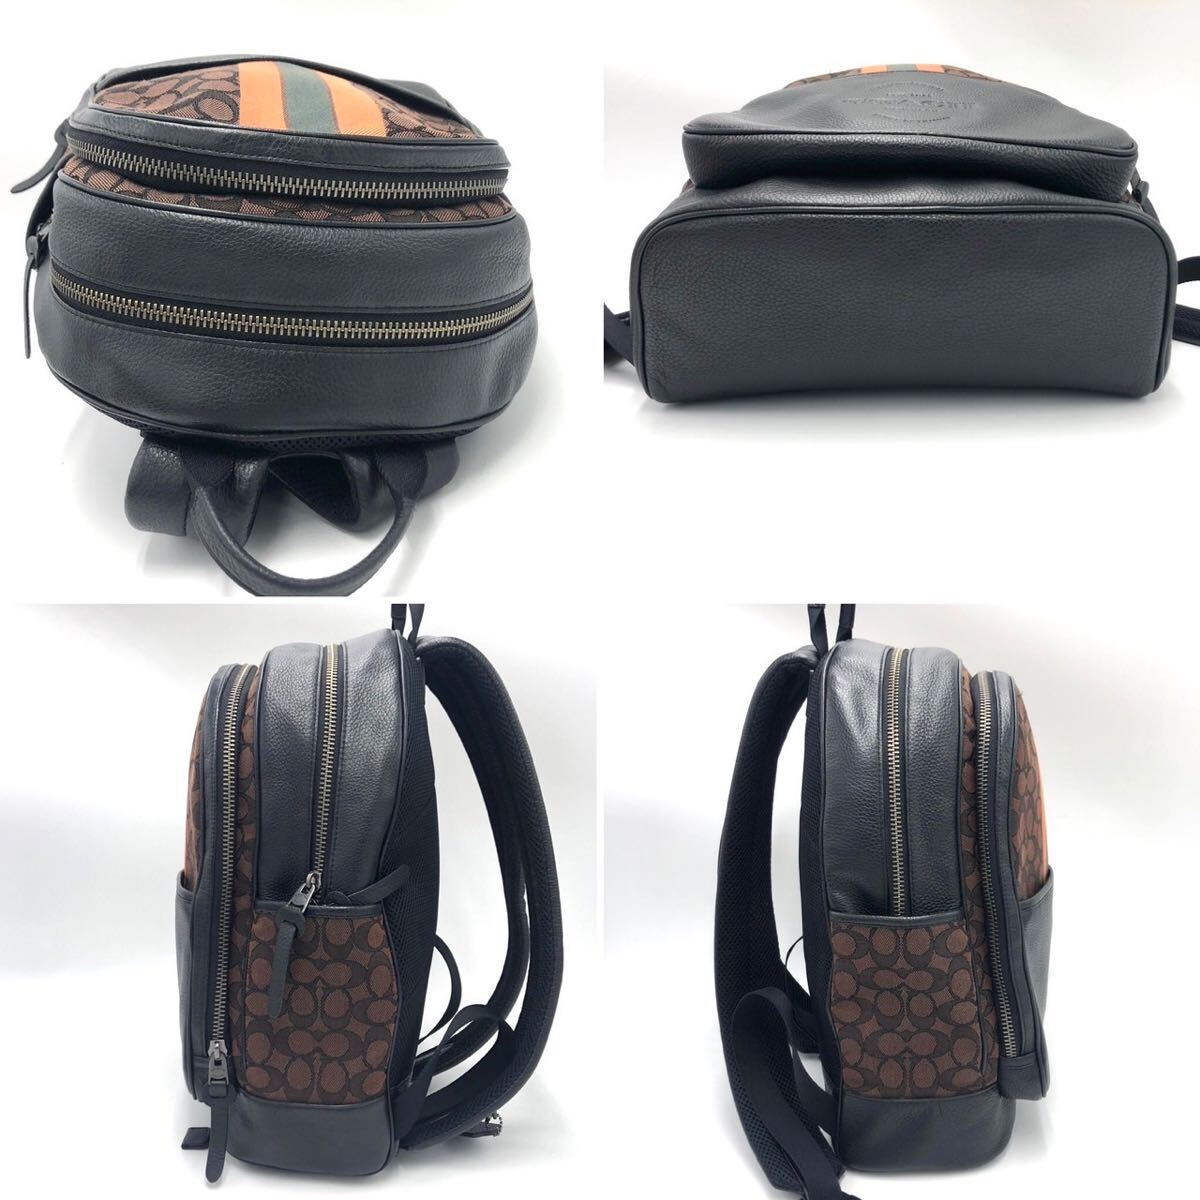  as good as new present close year of model *COACH rucksack backpack Coach bag leather men's business ton pson signature black 